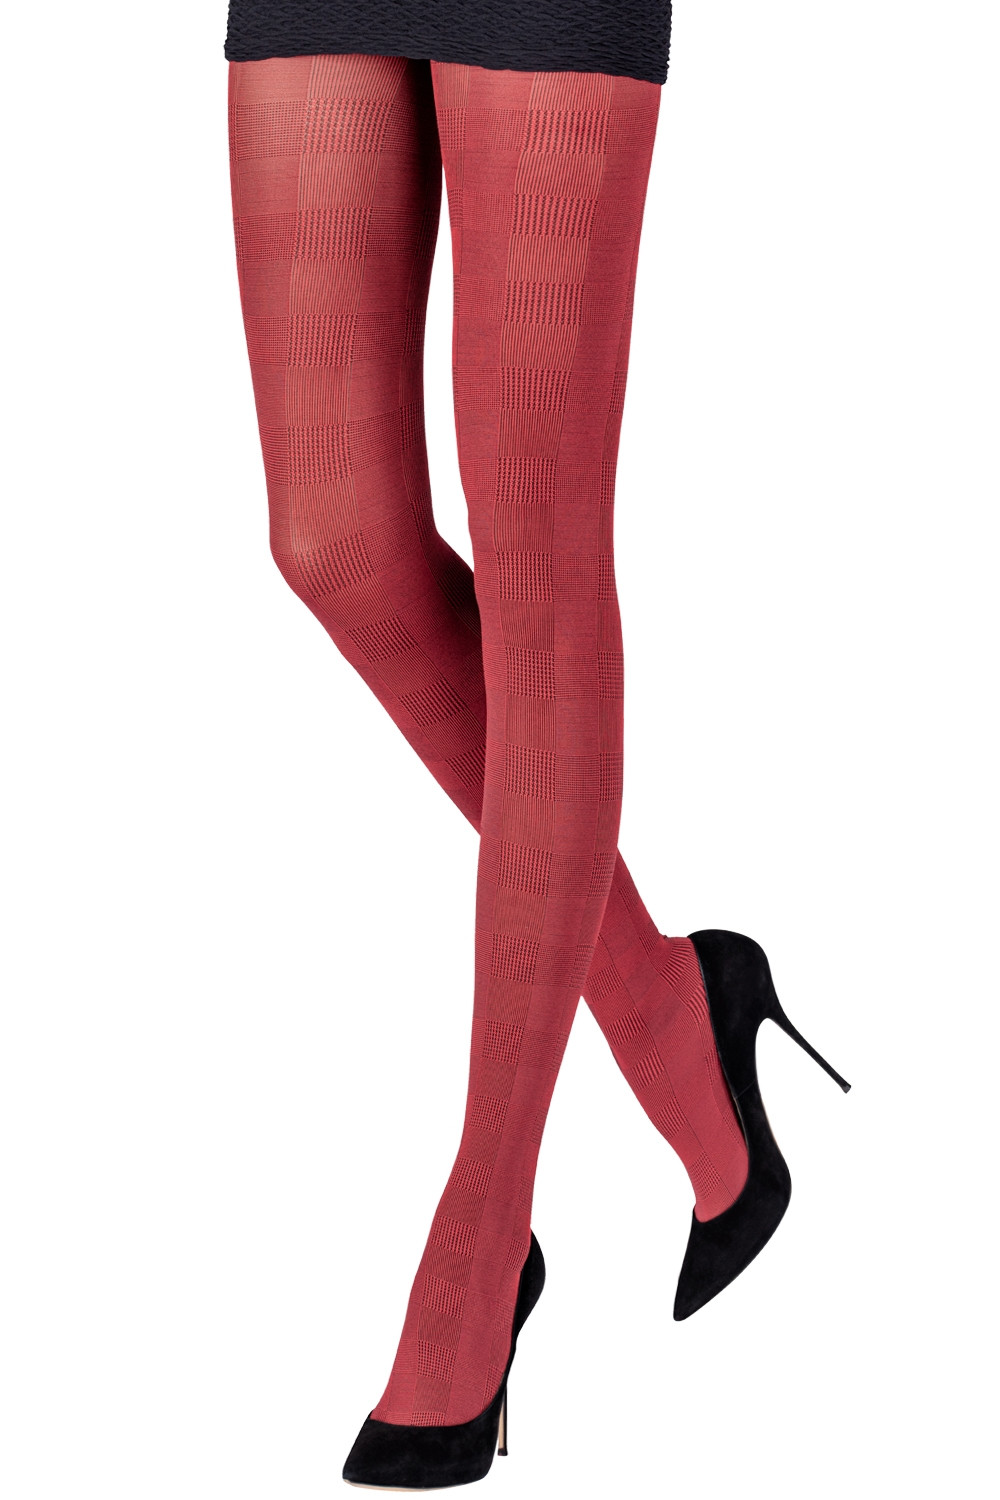 Plain Red 80 Denier - Red Opaque Pantyhose (Tights)